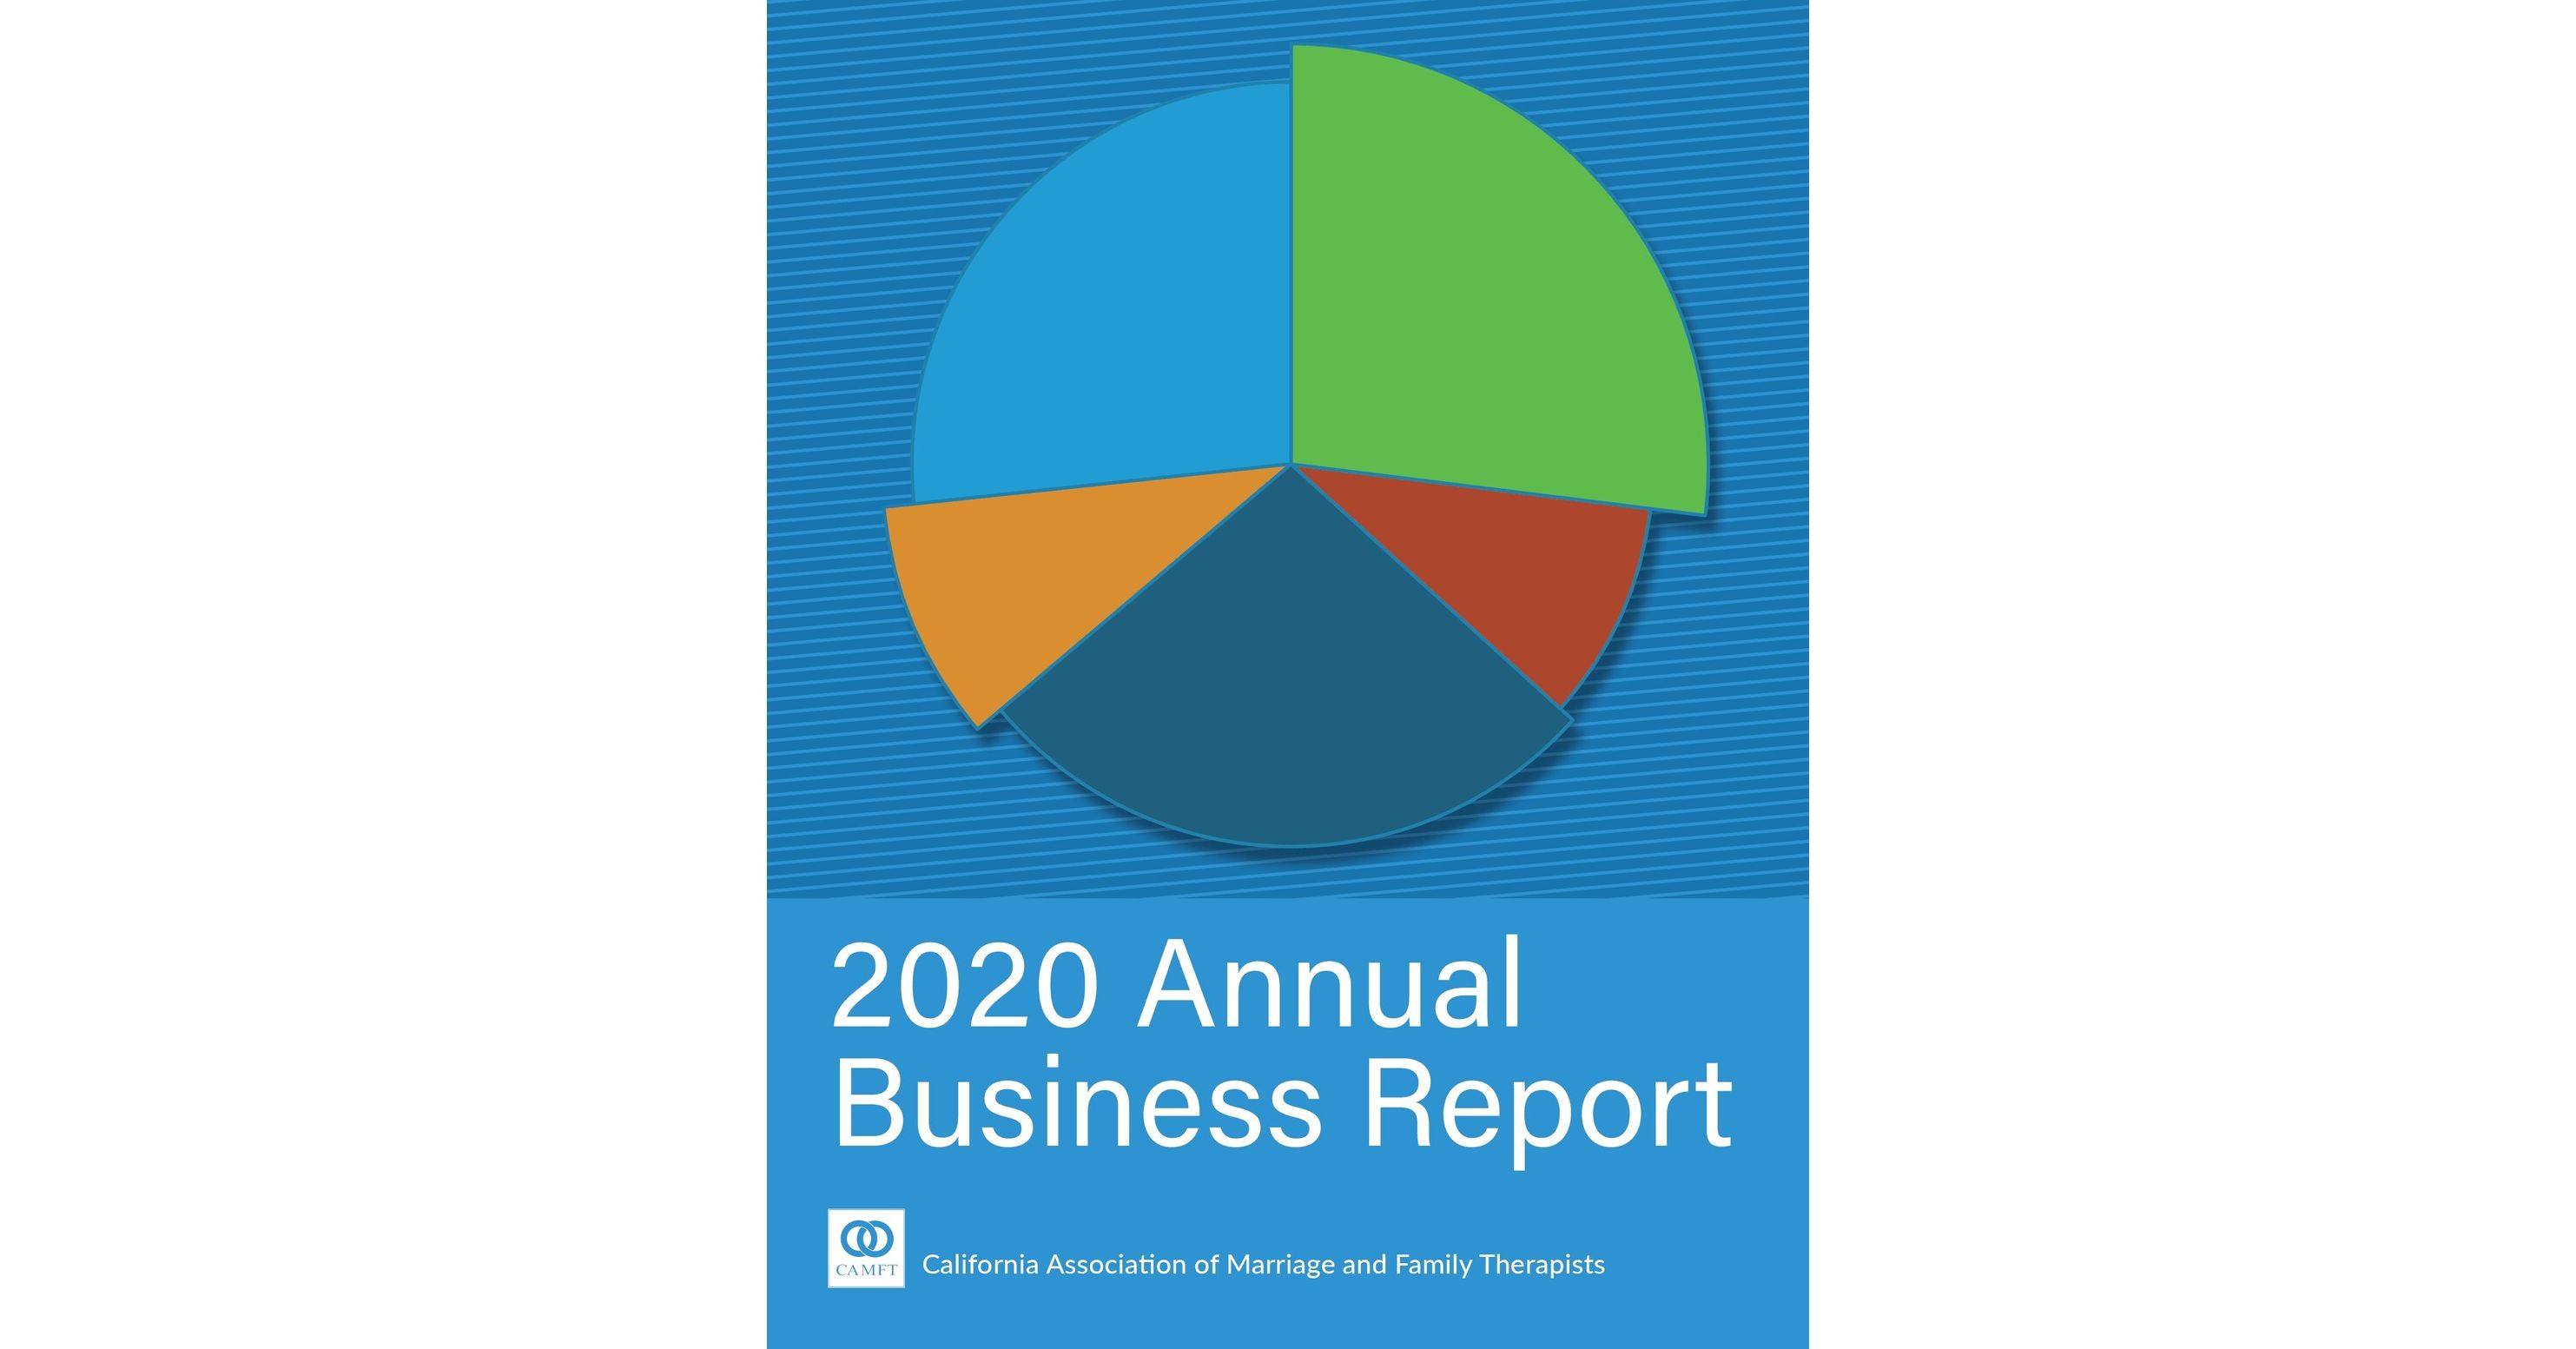 2020 Annual Business Report